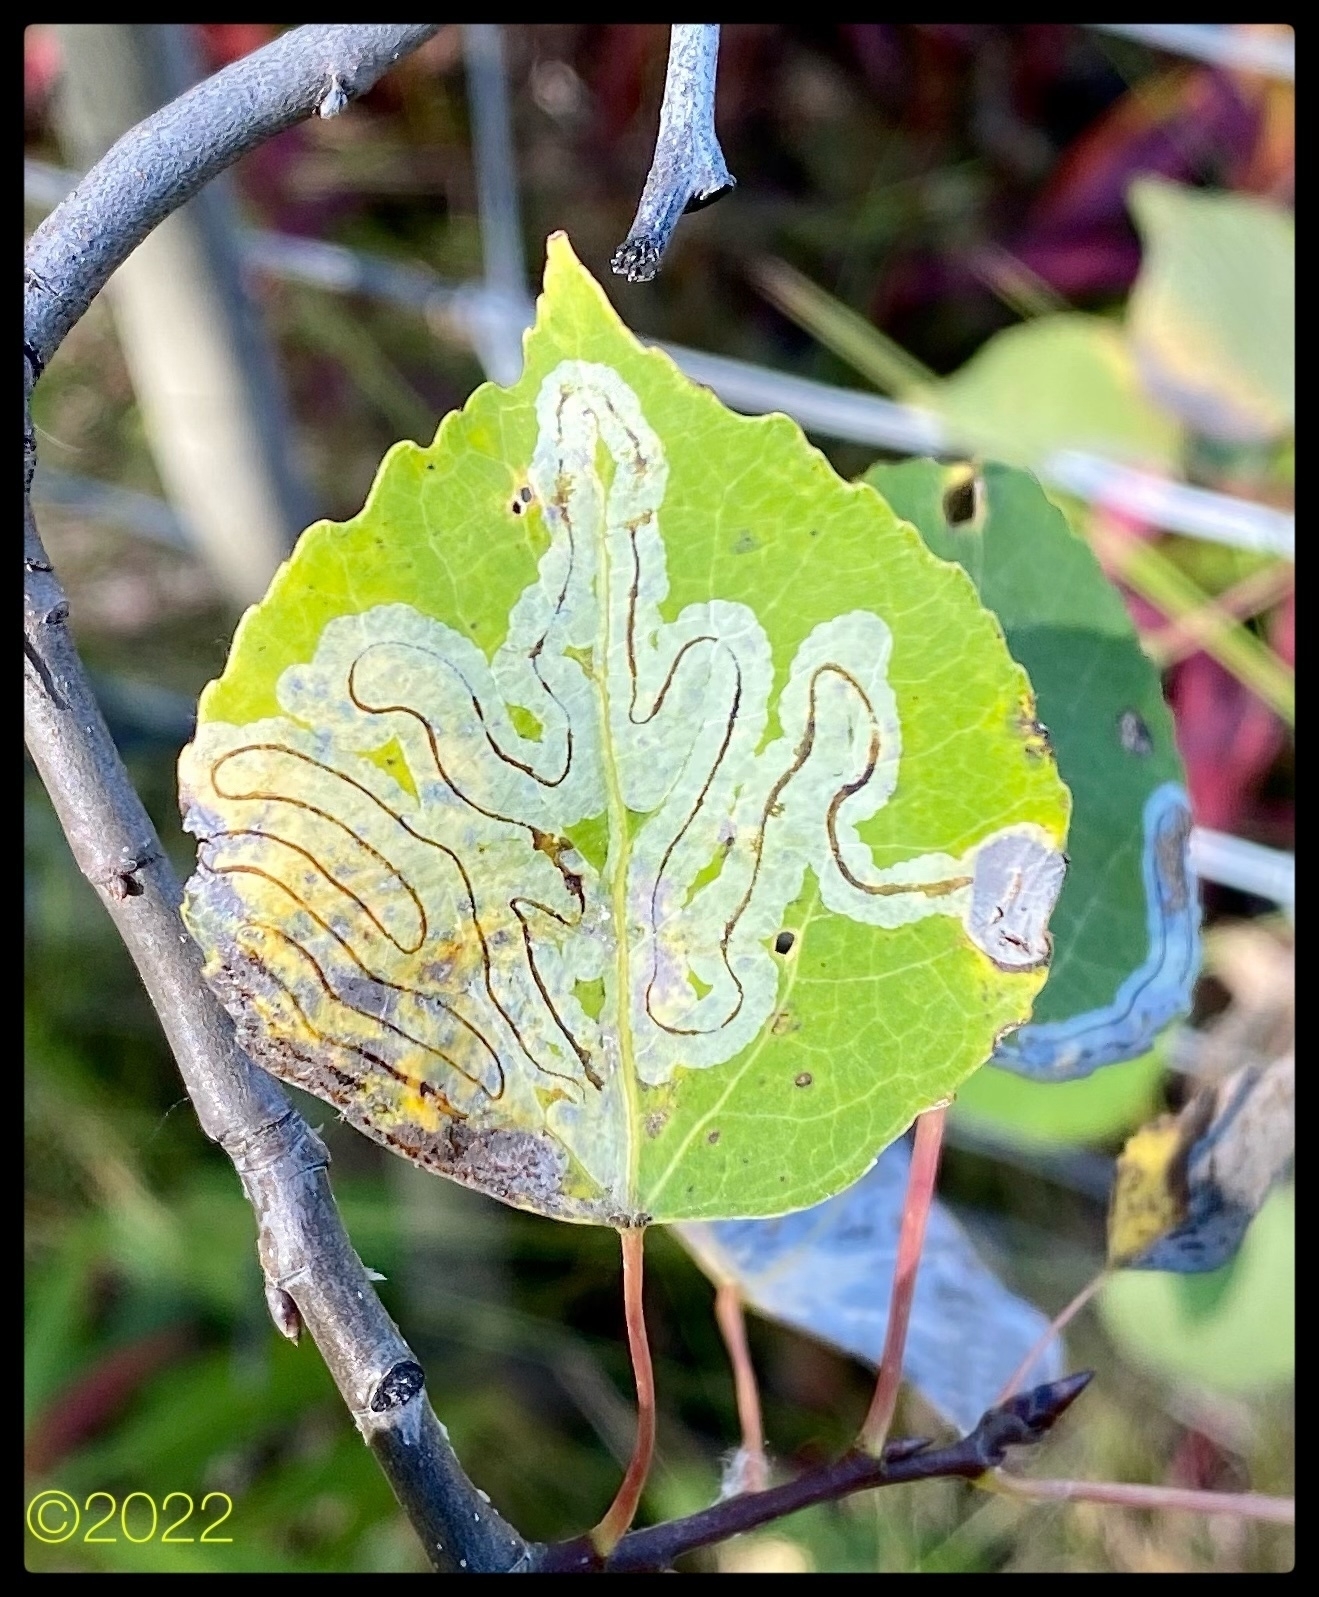 Aspen leaf where a burrowing insect has chewed a trail that looks like a space-filling curve